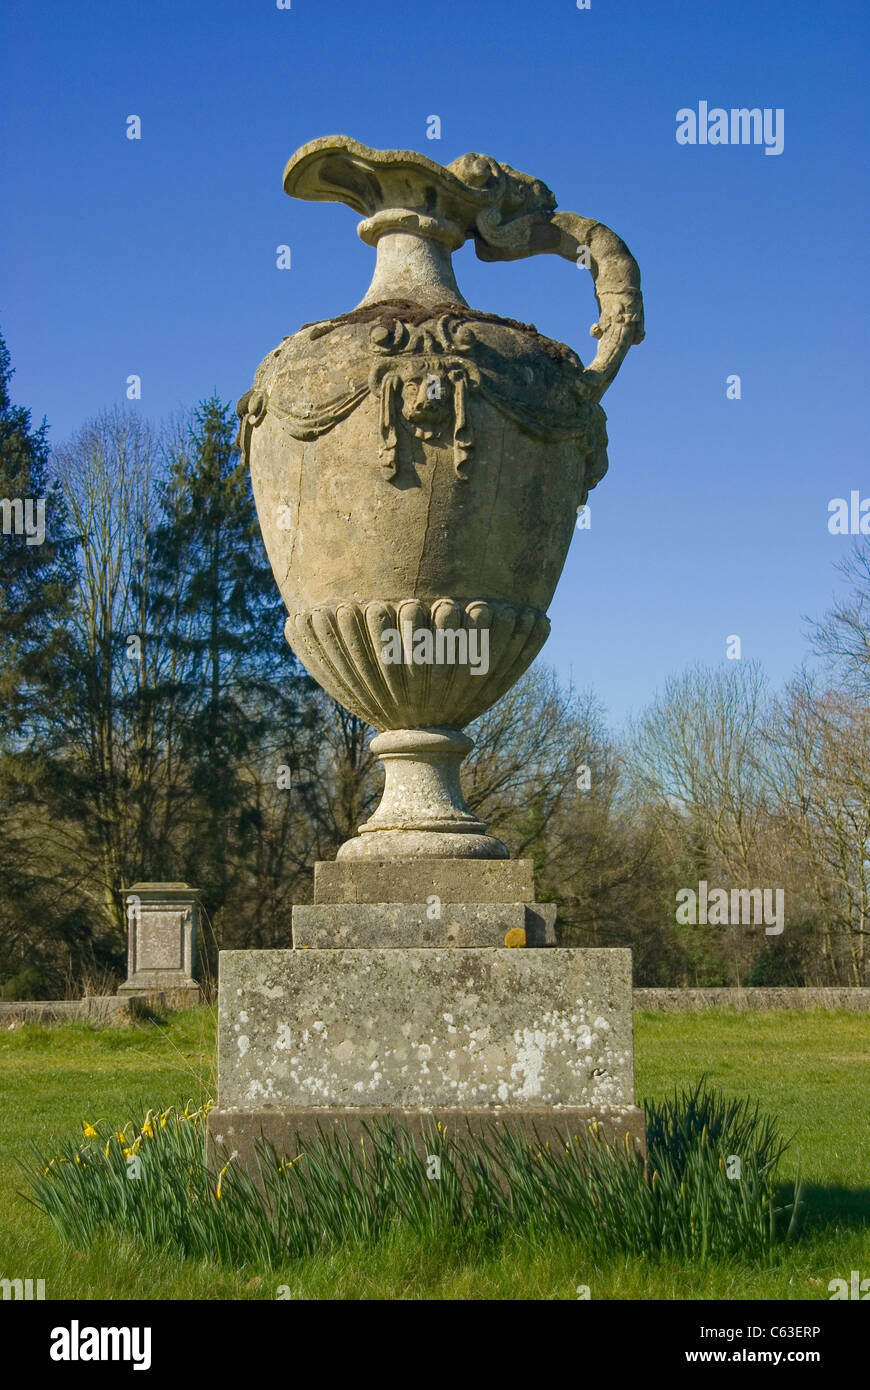 Grand ornamental vase at old renaissance period house in berkshire, england near Henley-on-Thames Stock Photo